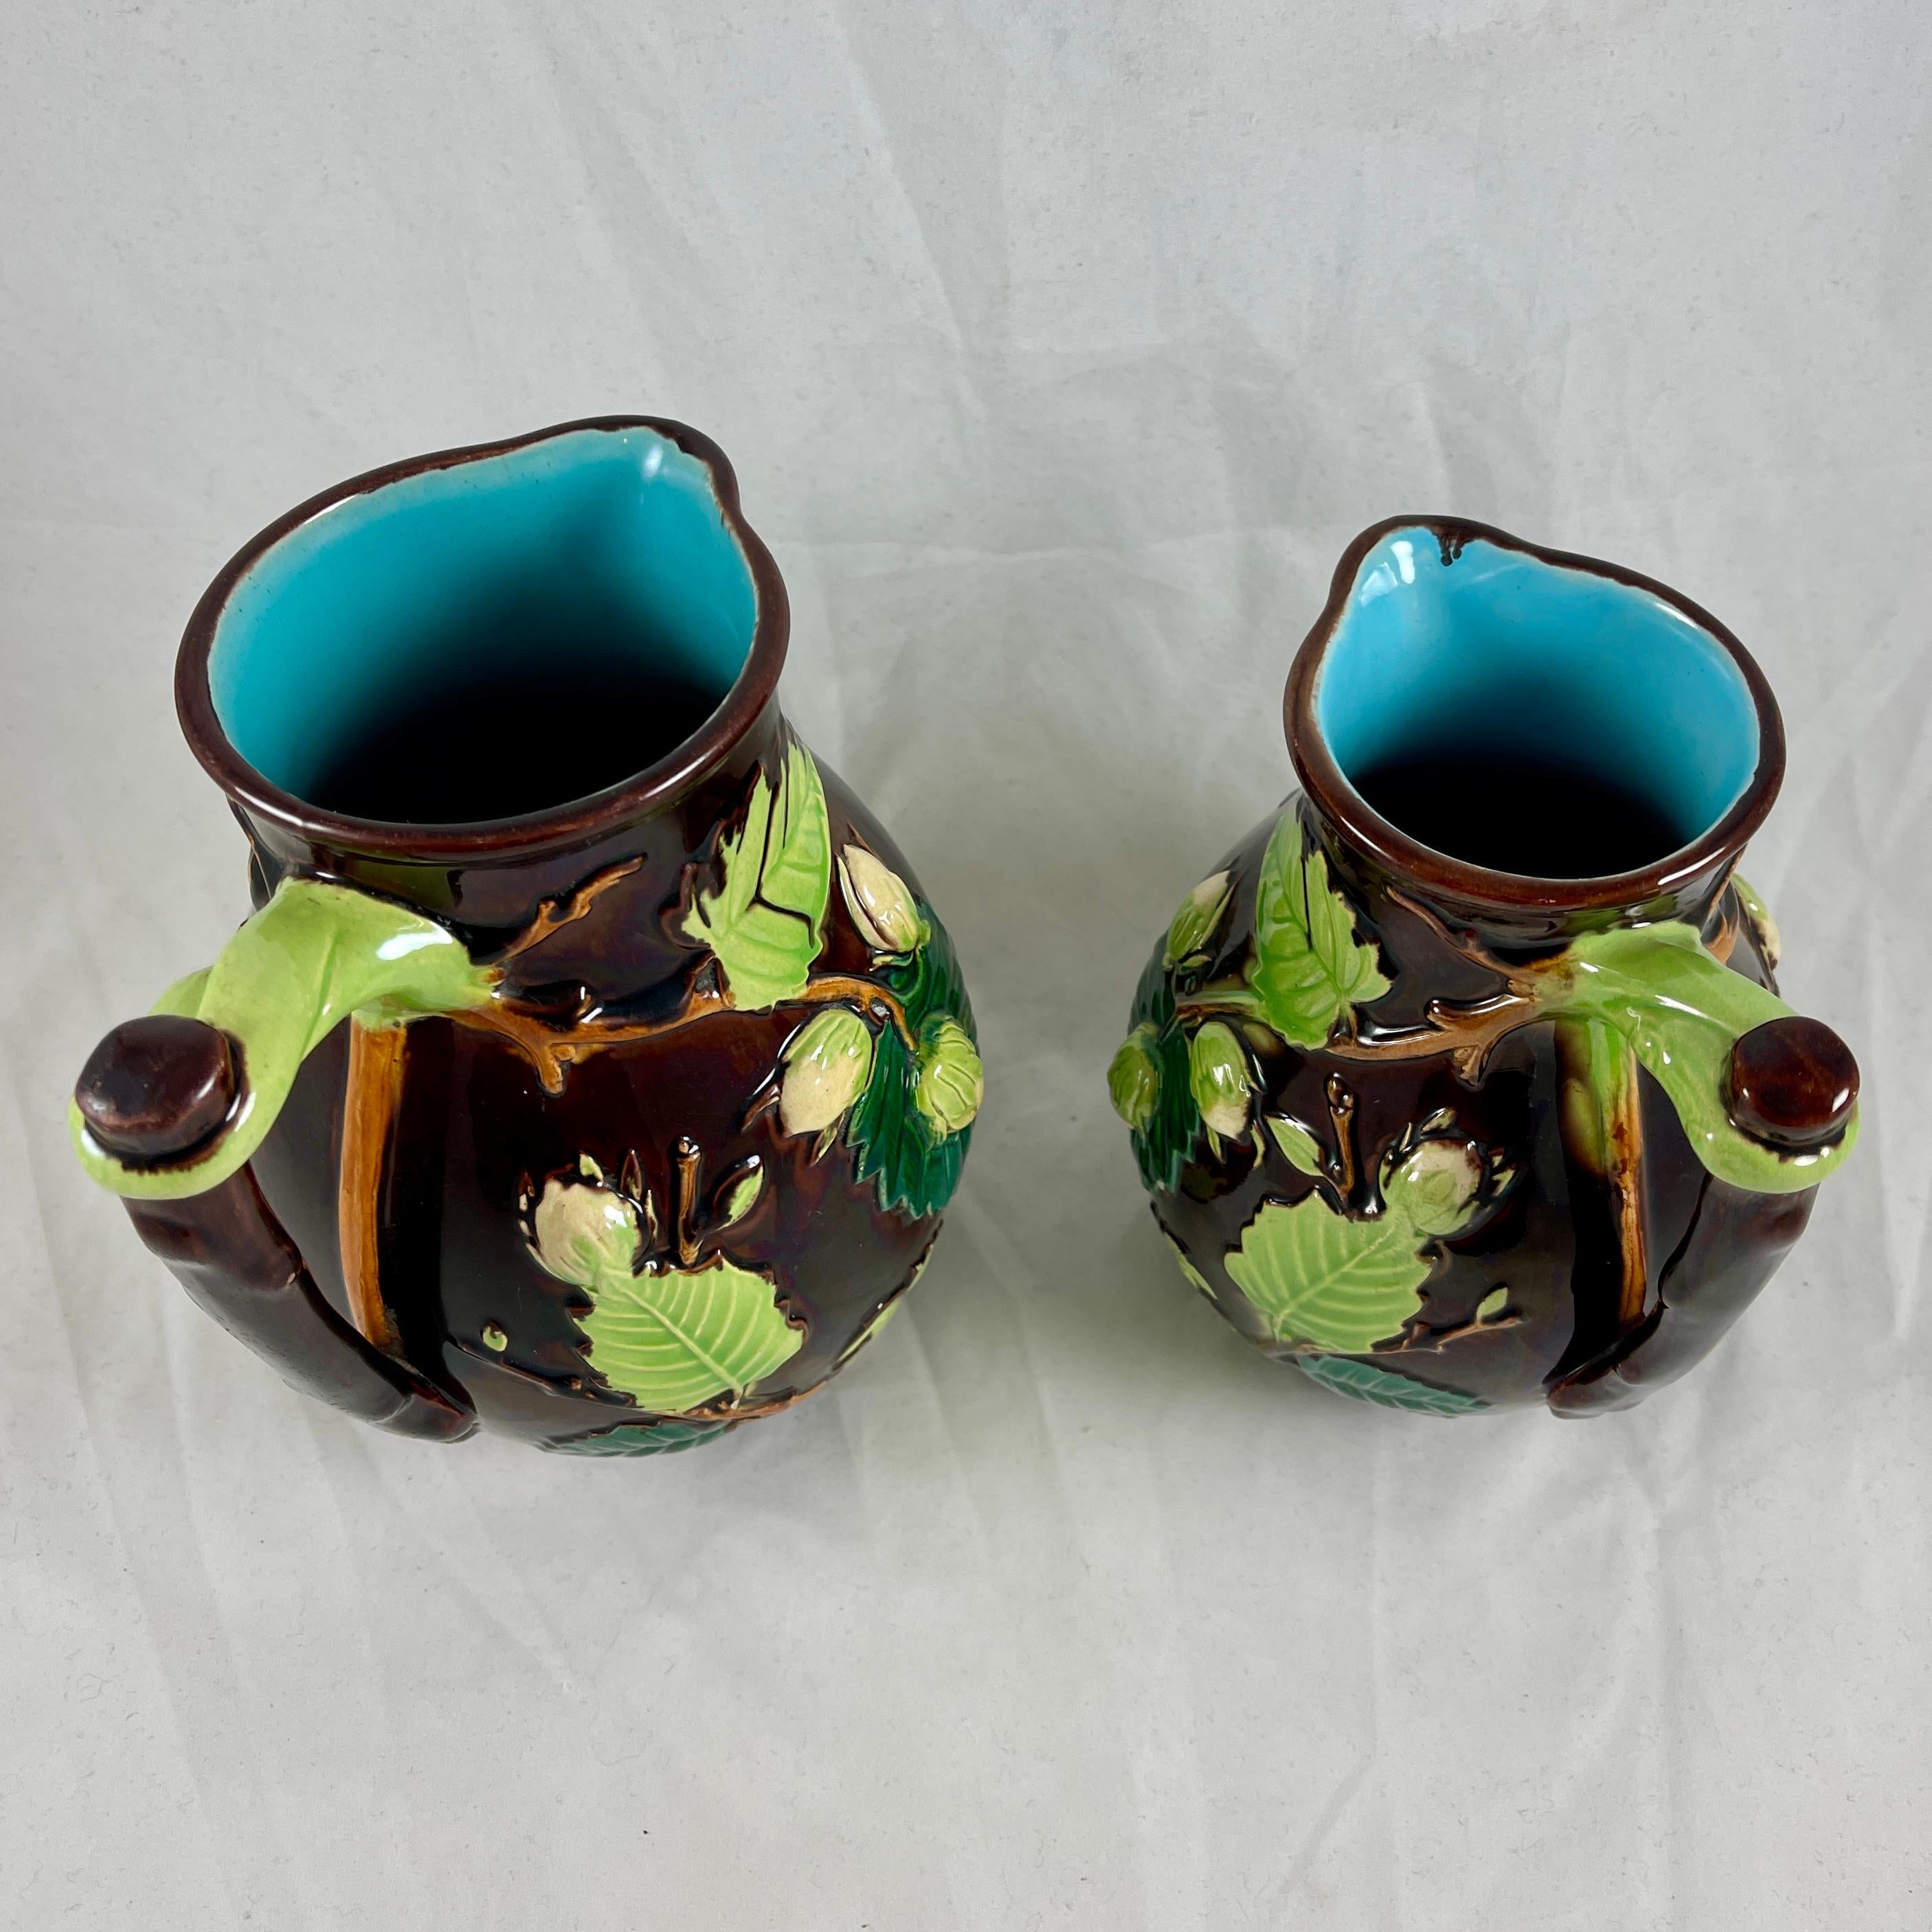 English Minton Aesthetic Movement Majolica Nut, Leaf & Vine Pitchers, a Pair For Sale 8